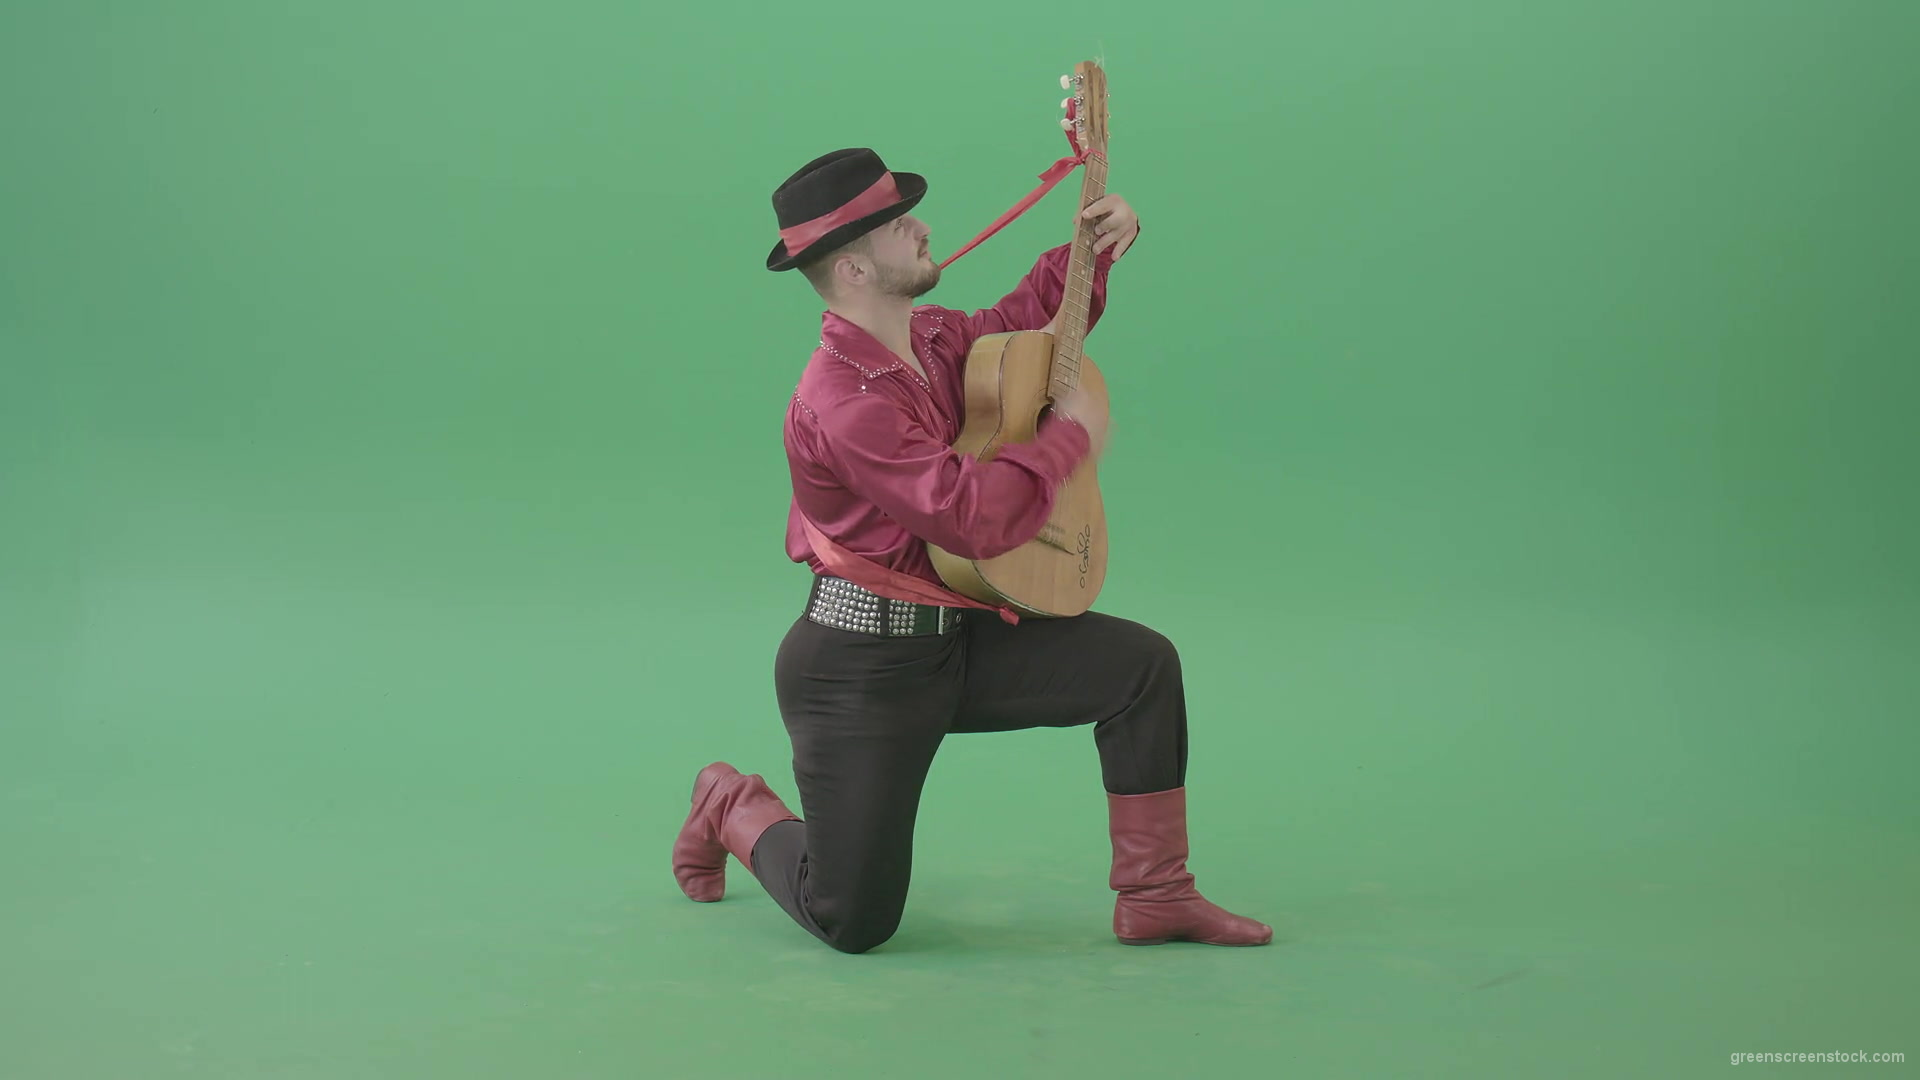 Man-in-Gipsy-costume-playing-love-song-on-guitar-isolated-on-green-screen-4K-Video-Footage-1920_005 Green Screen Stock